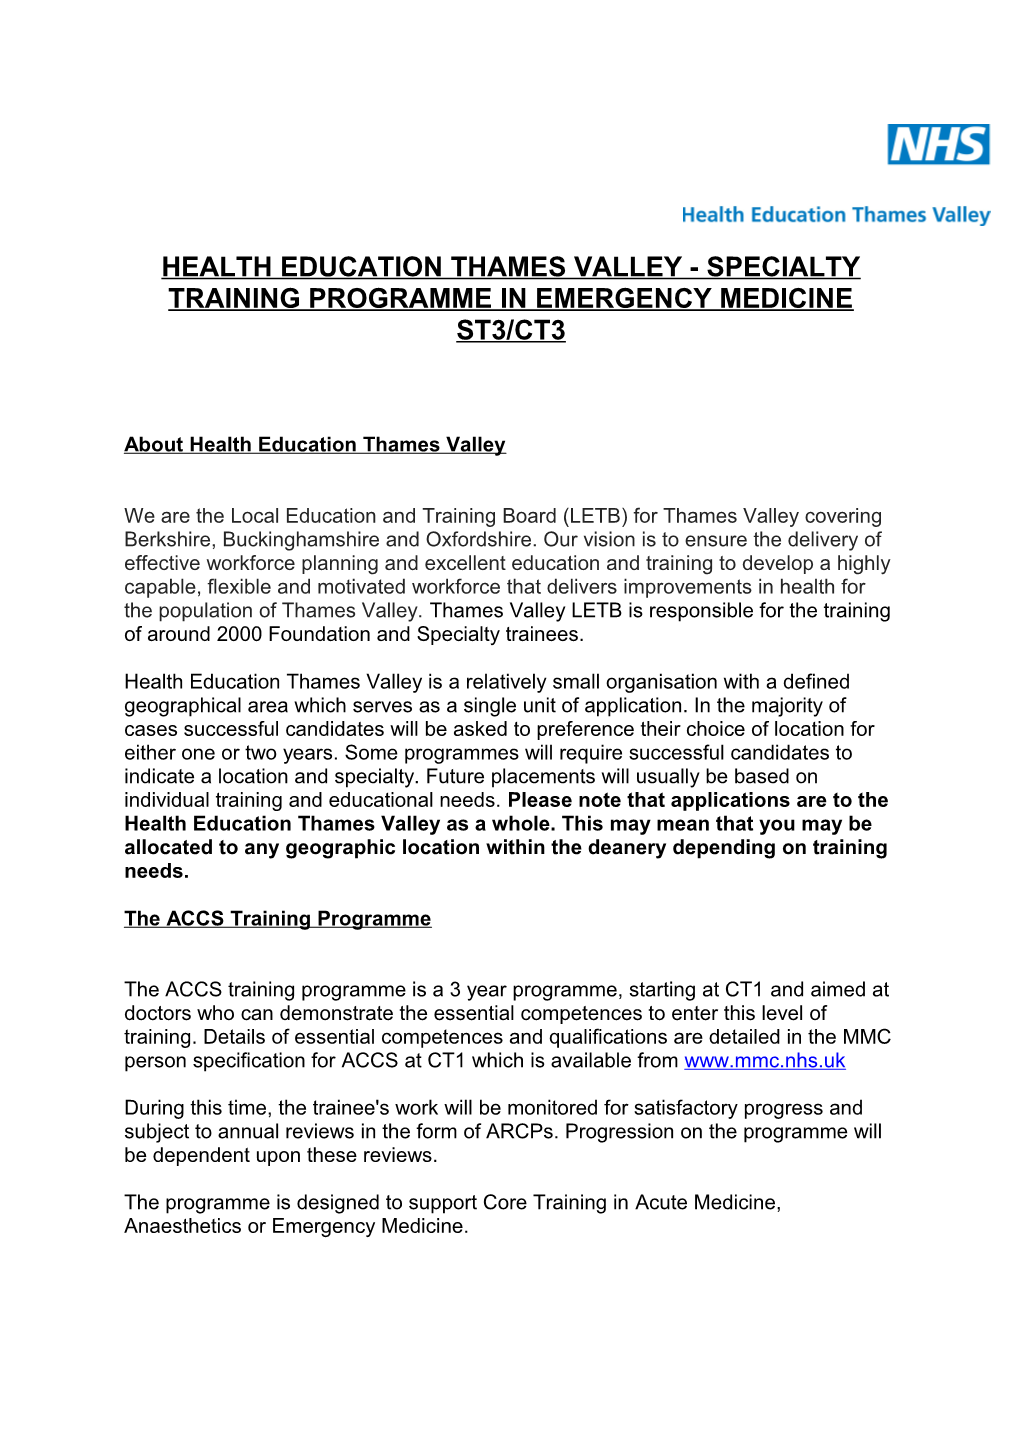 Health Education Thames Valley- Specialty Training Programme in Emergency Medicine St3/Ct3